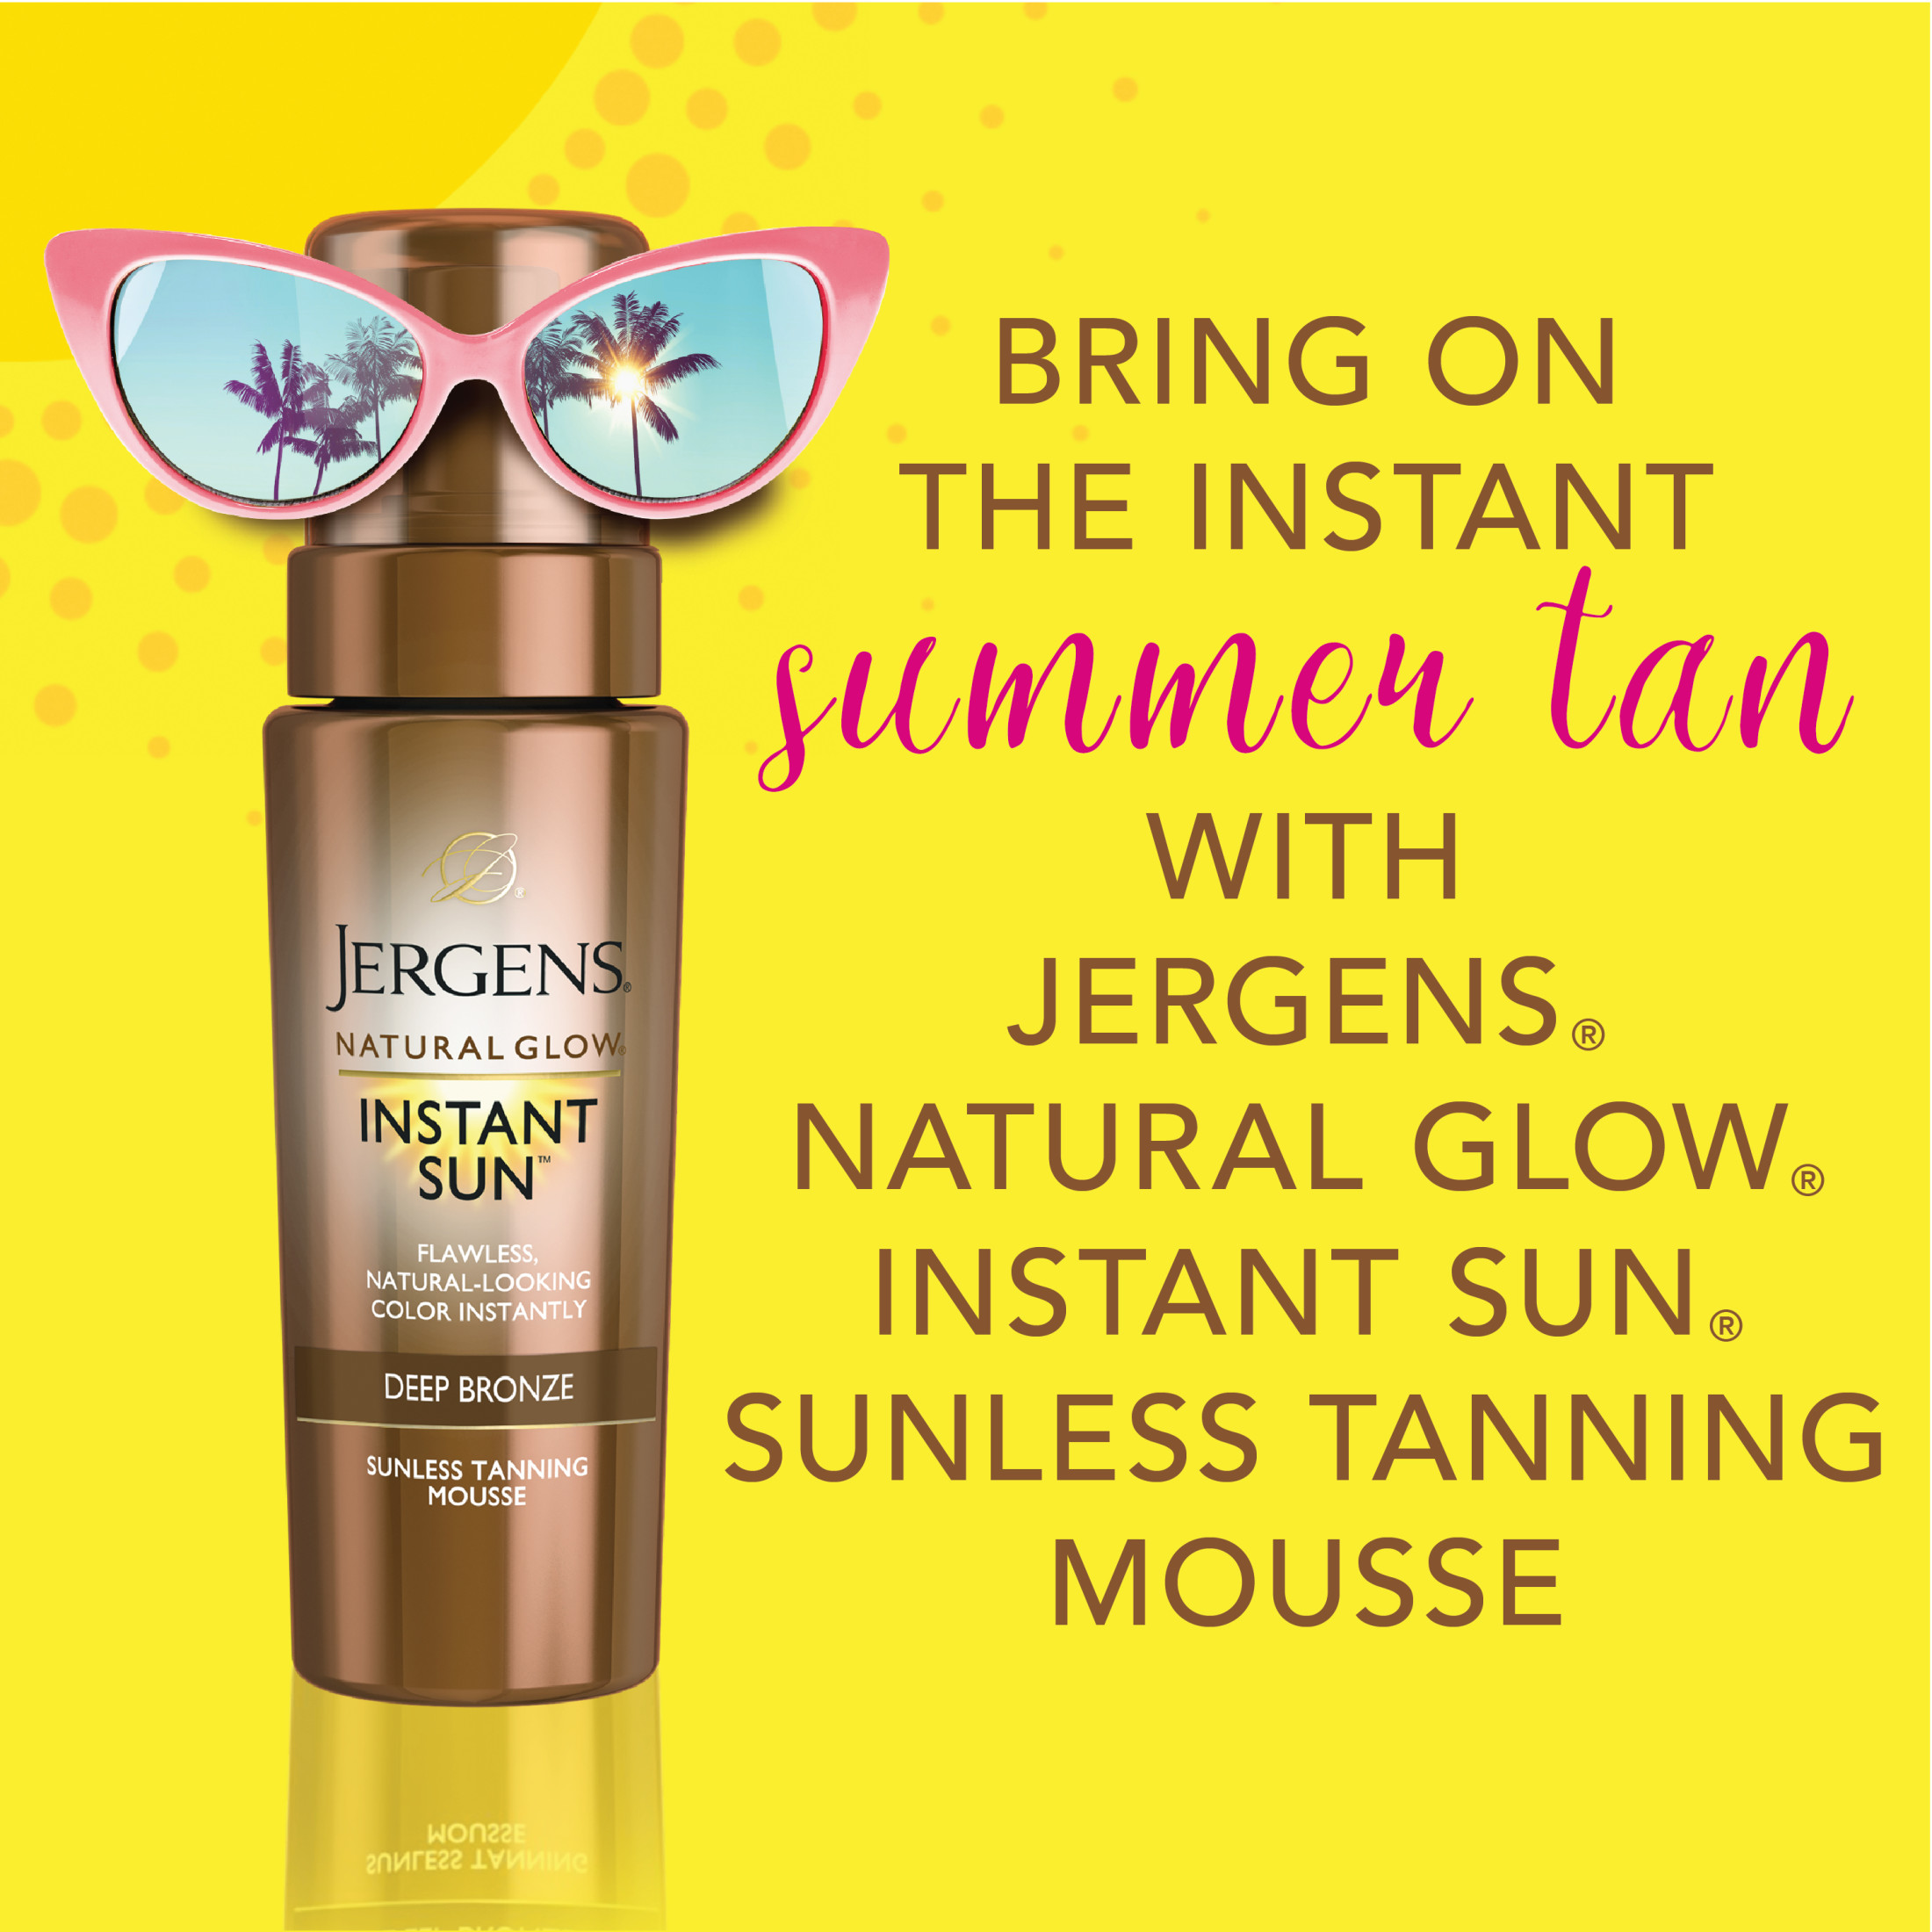 Jergens Natural Glow Instant Sun Sunless Tanning Mousse, Deep Bronze, 6 fl oz - image 5 of 10